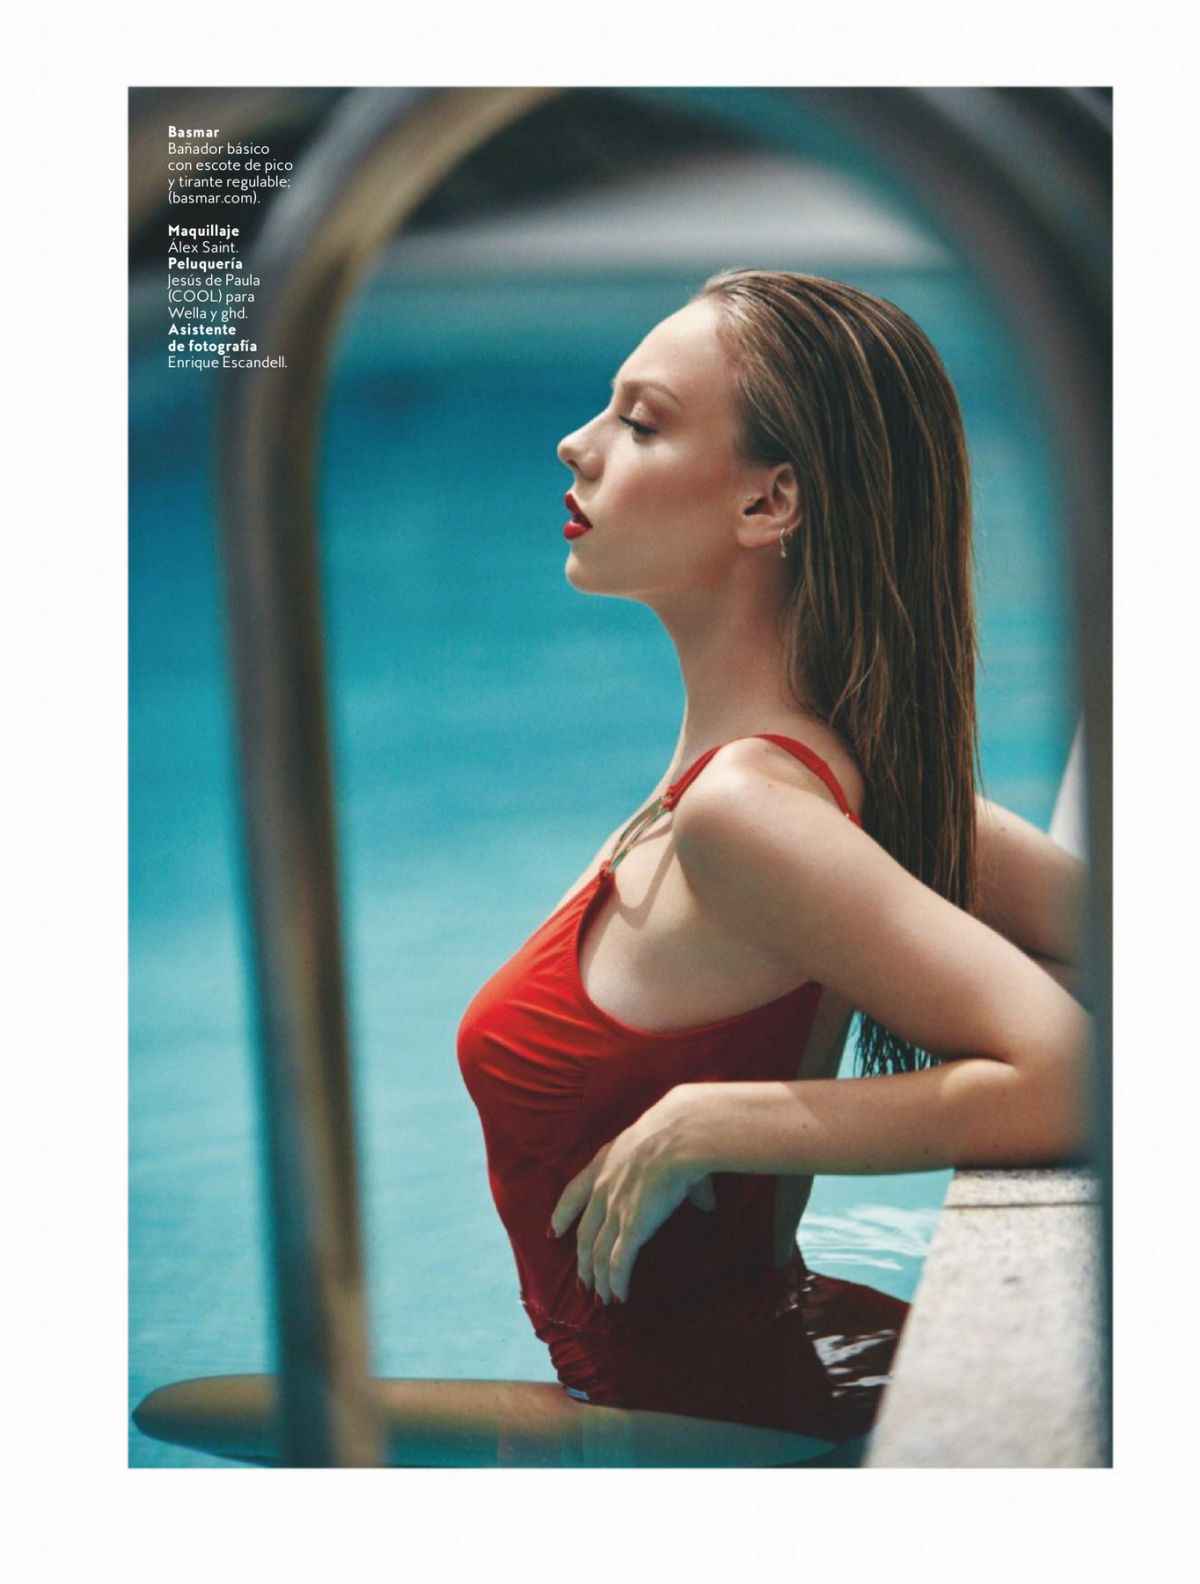 Ester Exposito in Instyle Magazine, Spain July 2020